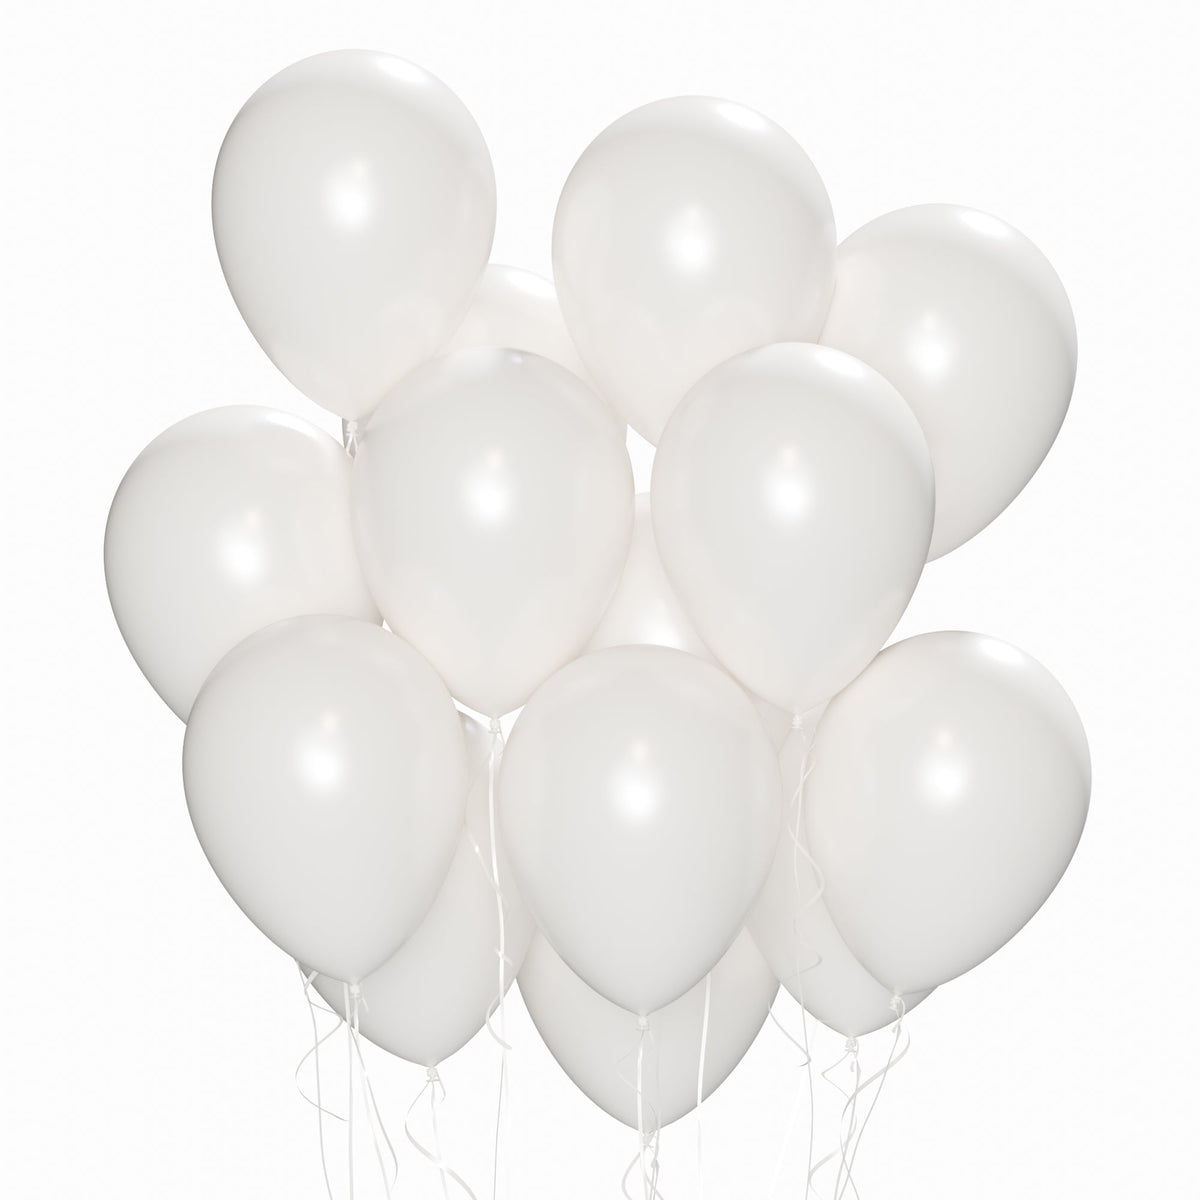 WIDE OCEAN INTERNATIONAL TRADE BEIJING CO., LTD Balloons White Latex Balloon 12 Inches, Pearl Collection, 15 Count 810064197482